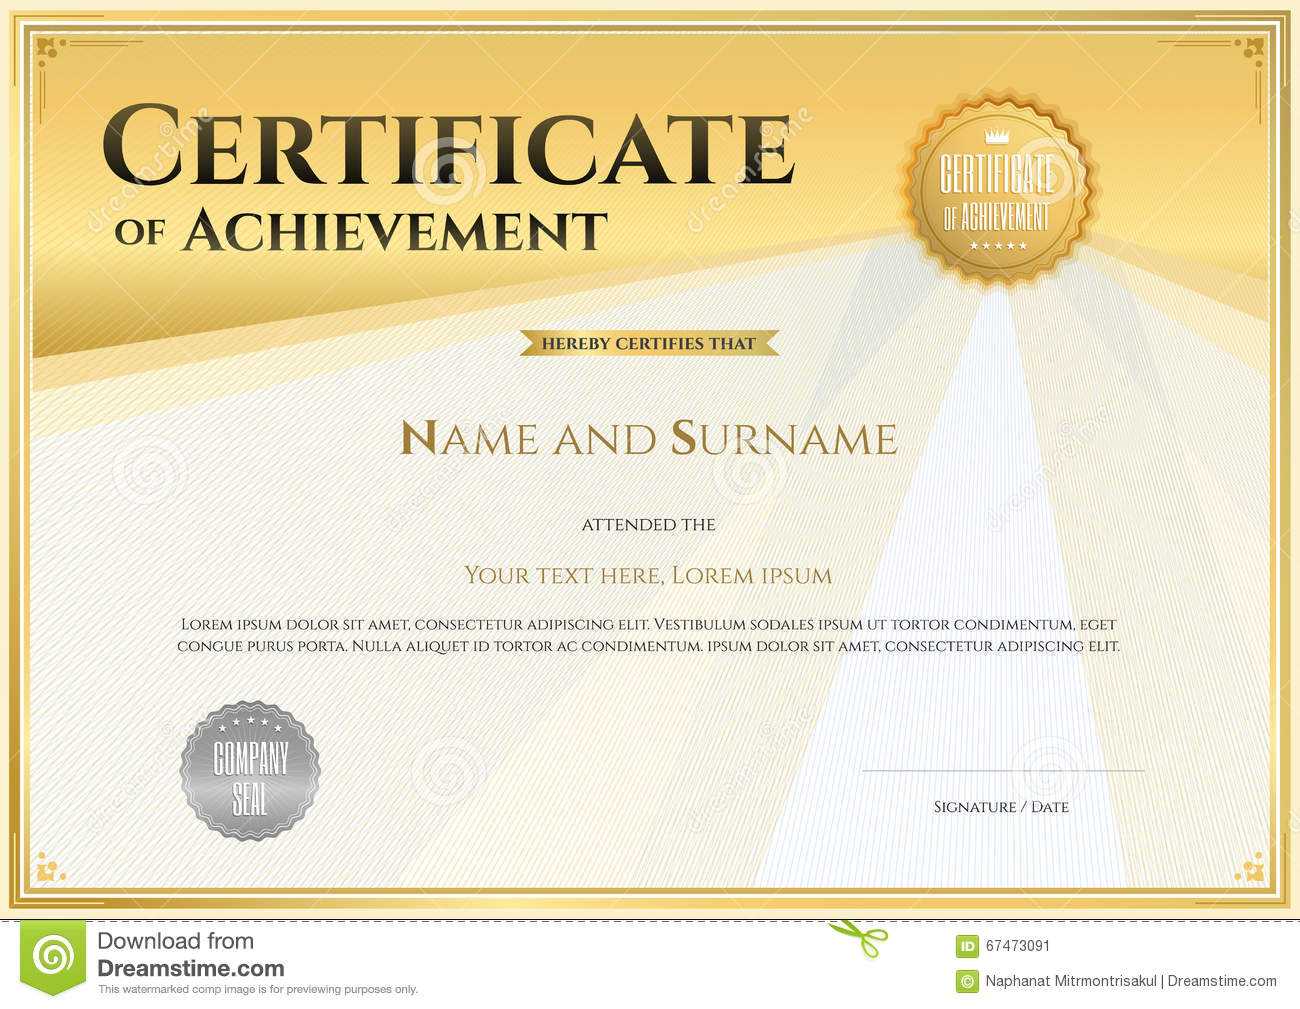 Certificate Template In Vector For Achievement Graduation With Sales Certificate Template